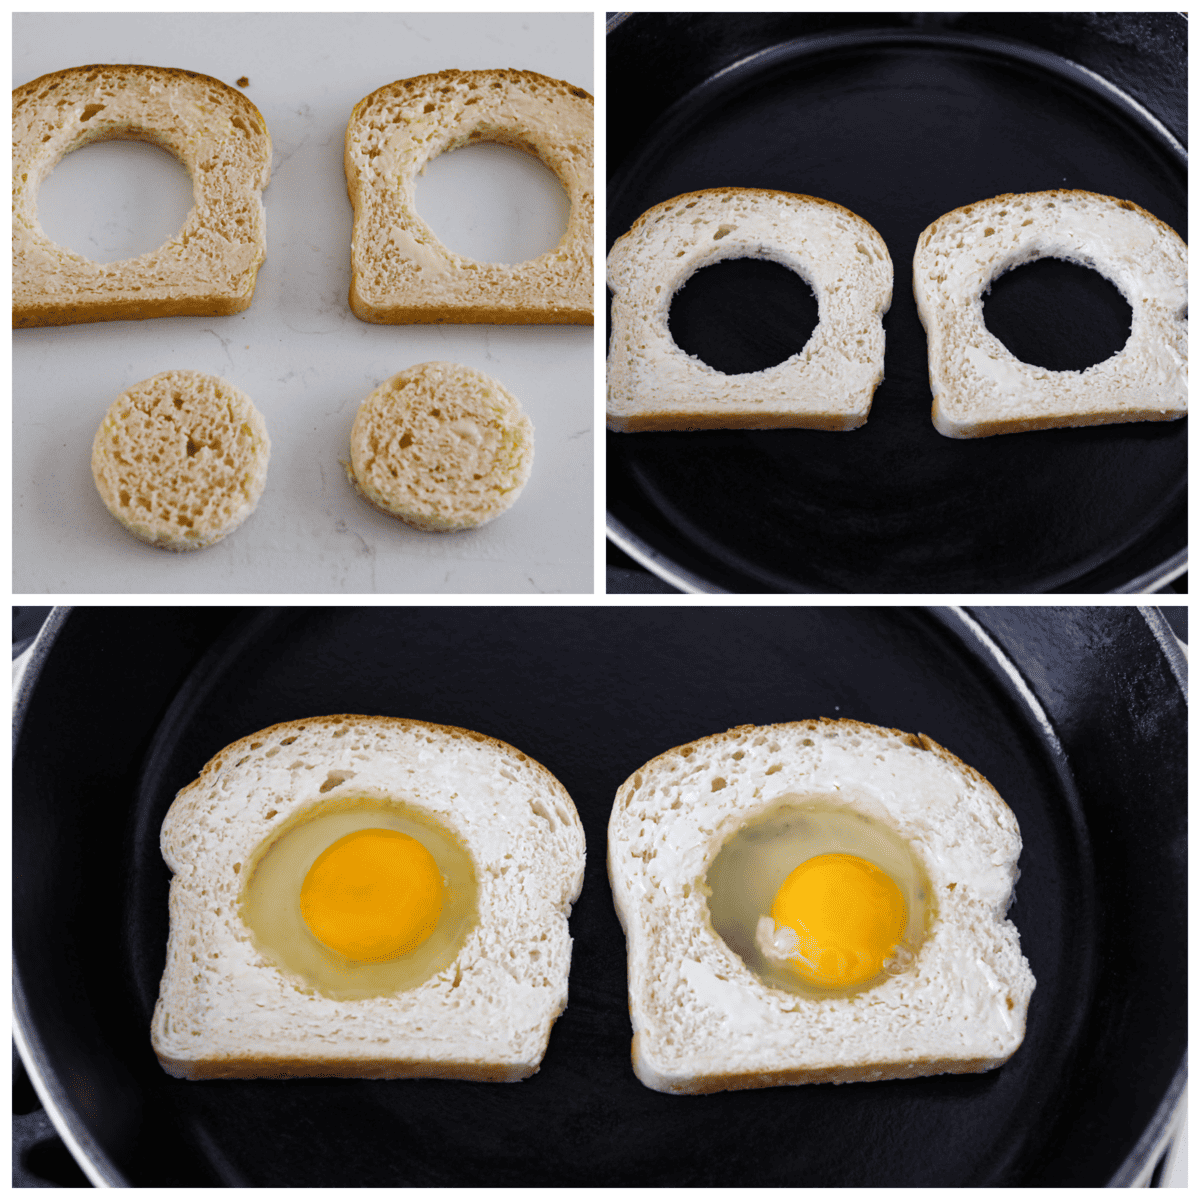 3-photo collage of the centers of the bread being cut out and filled with eggs.